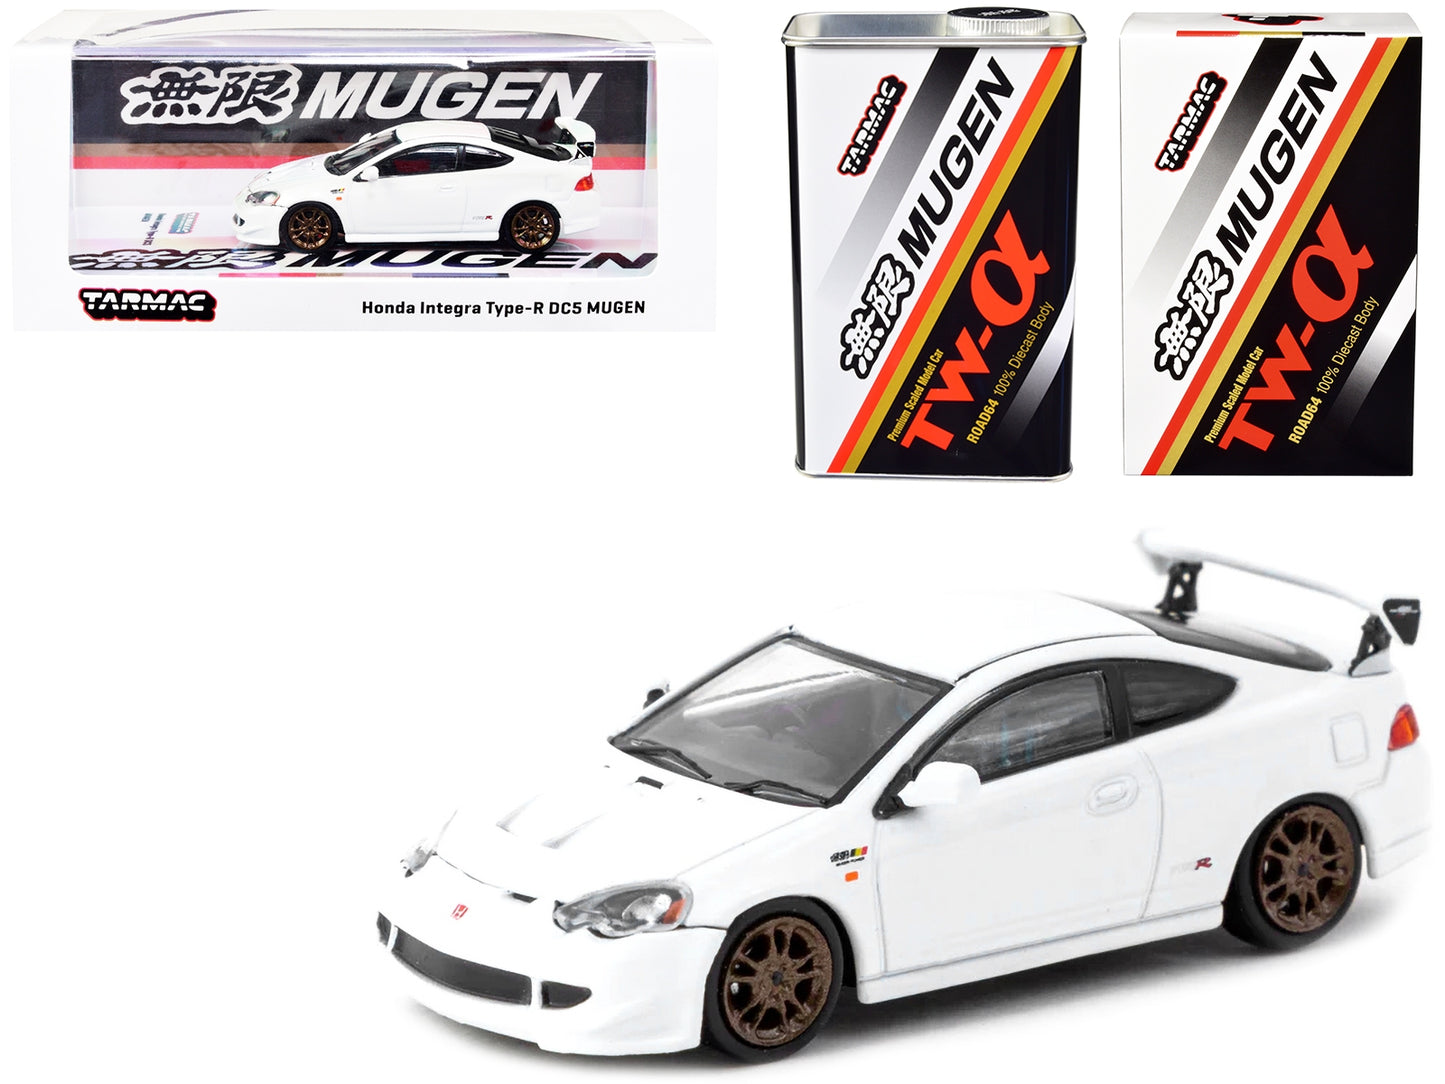 Honda Integra Type-R DC5 "MUGEN" Championship White with Metal Oil Can "Road64" Series 1/64 Diecast Model Car by Tarmac Works